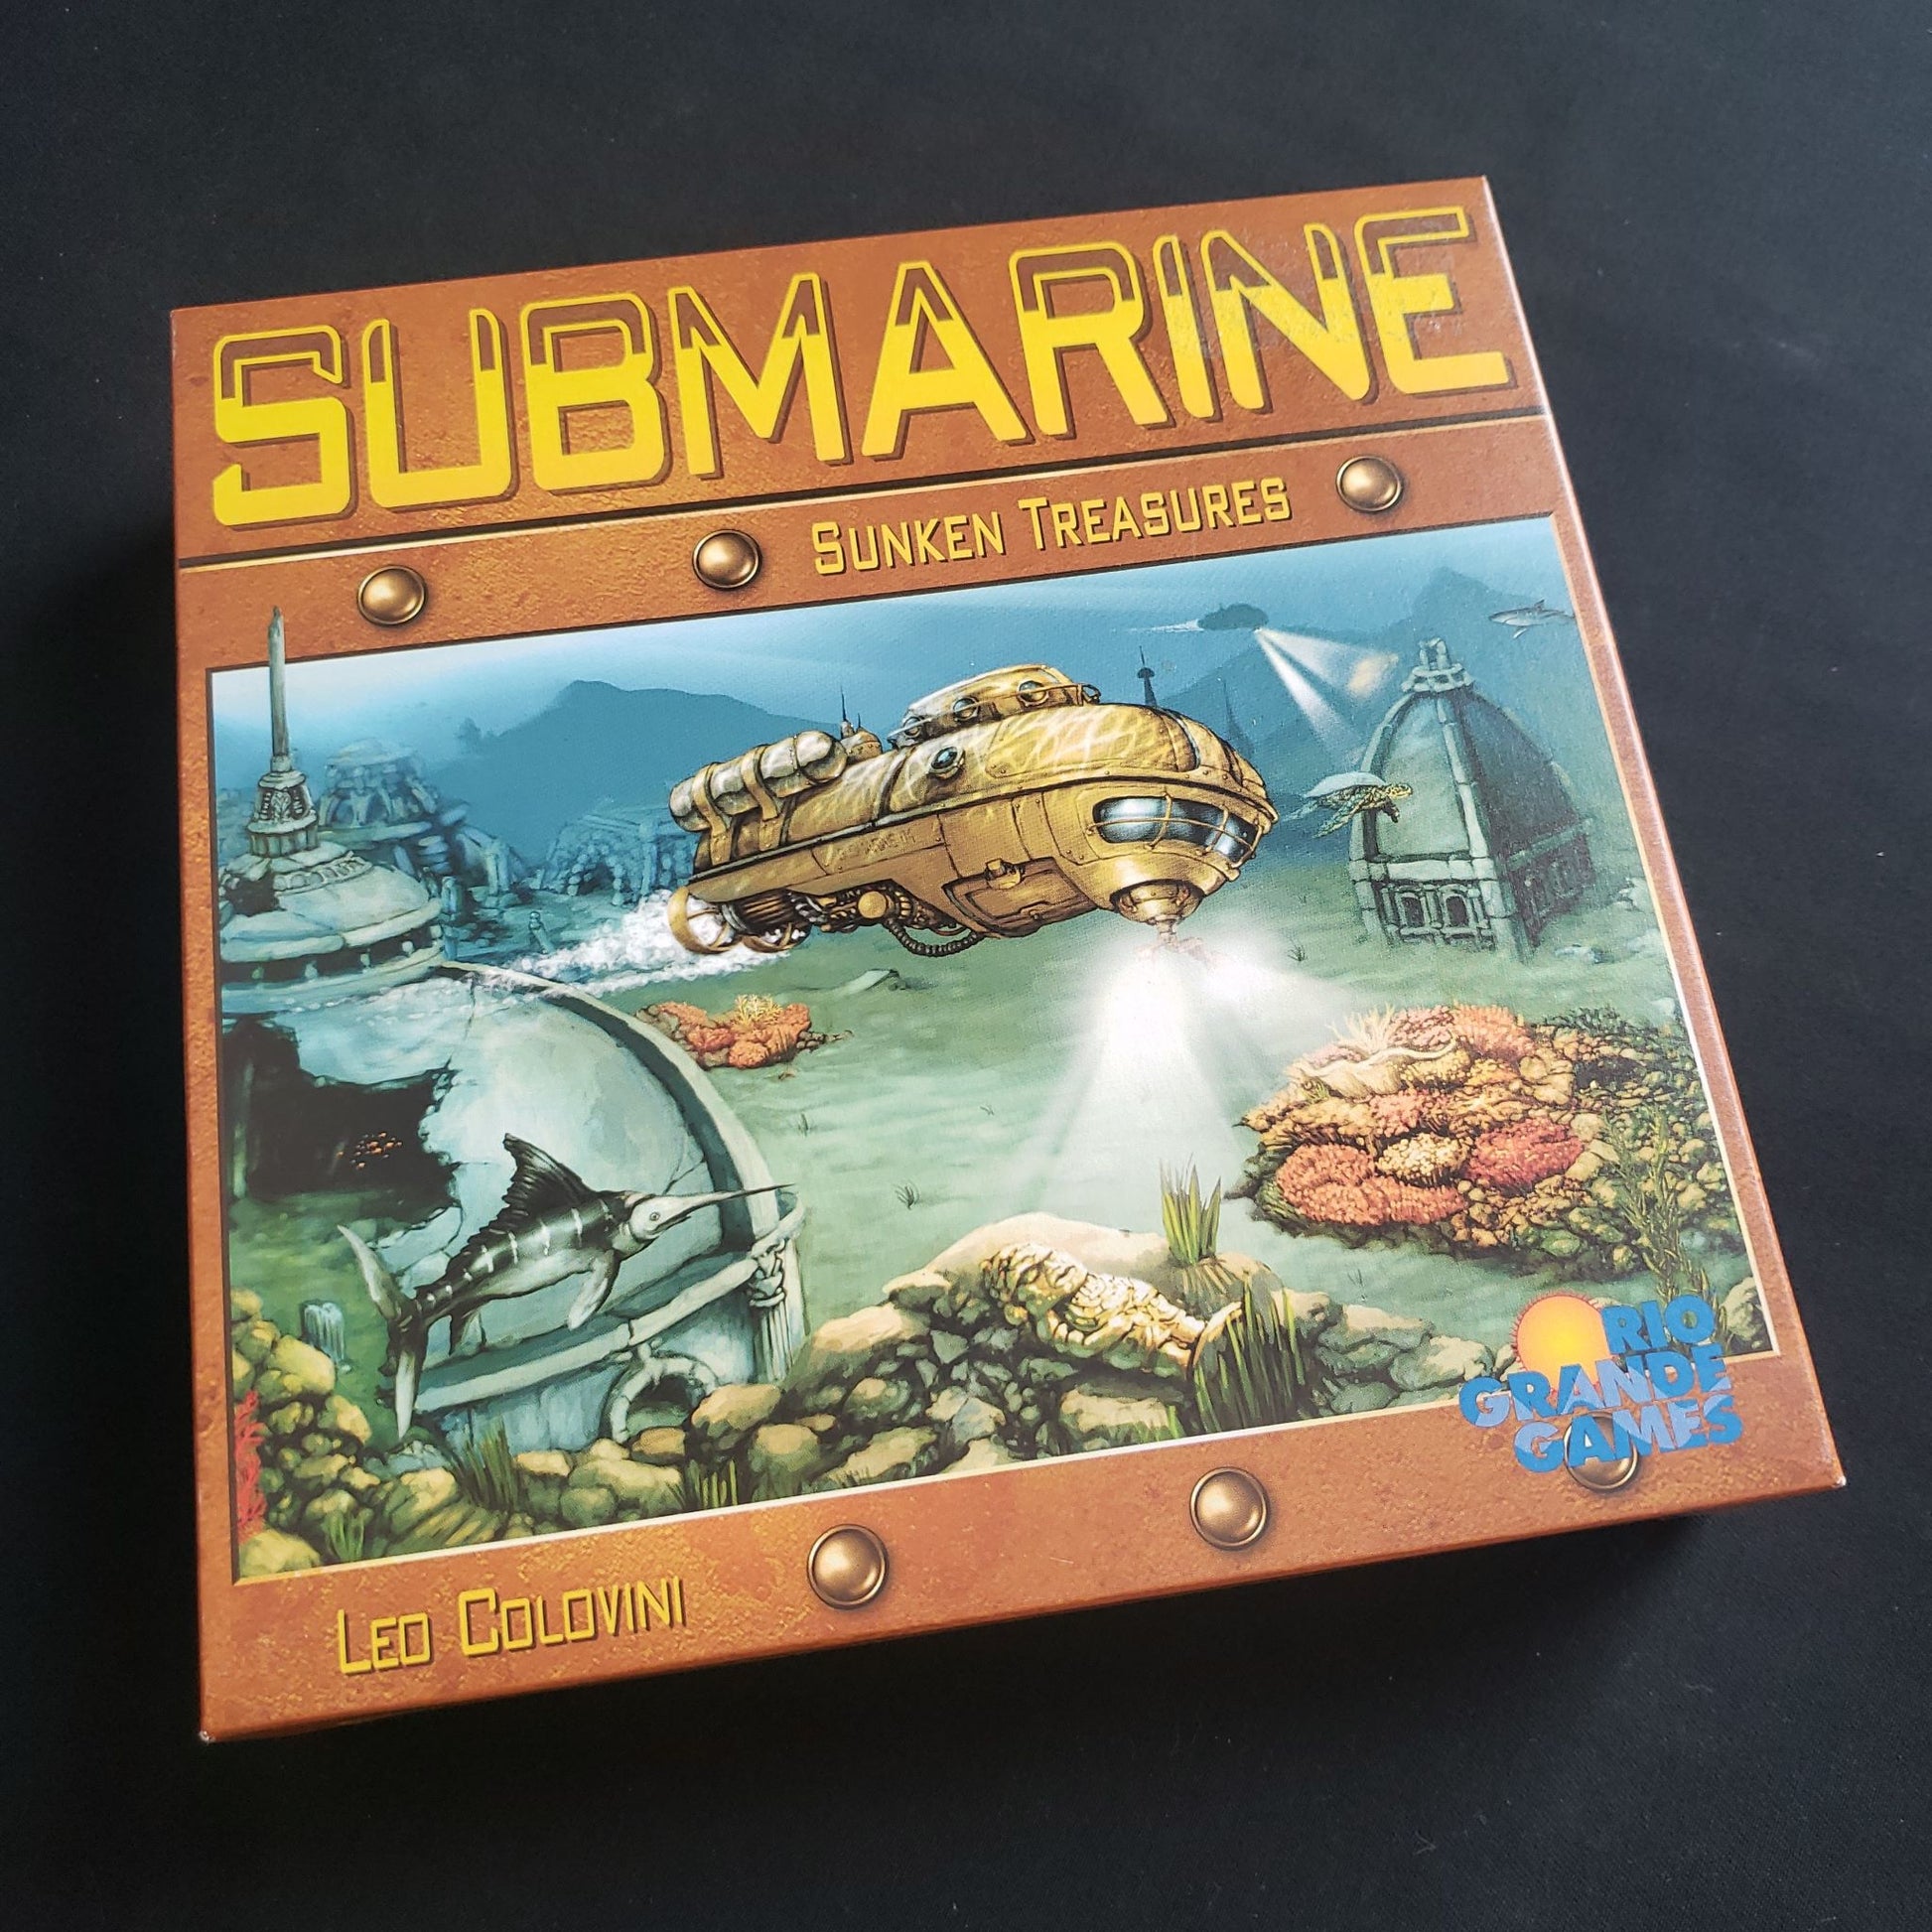 Submarine board game - front cover of box